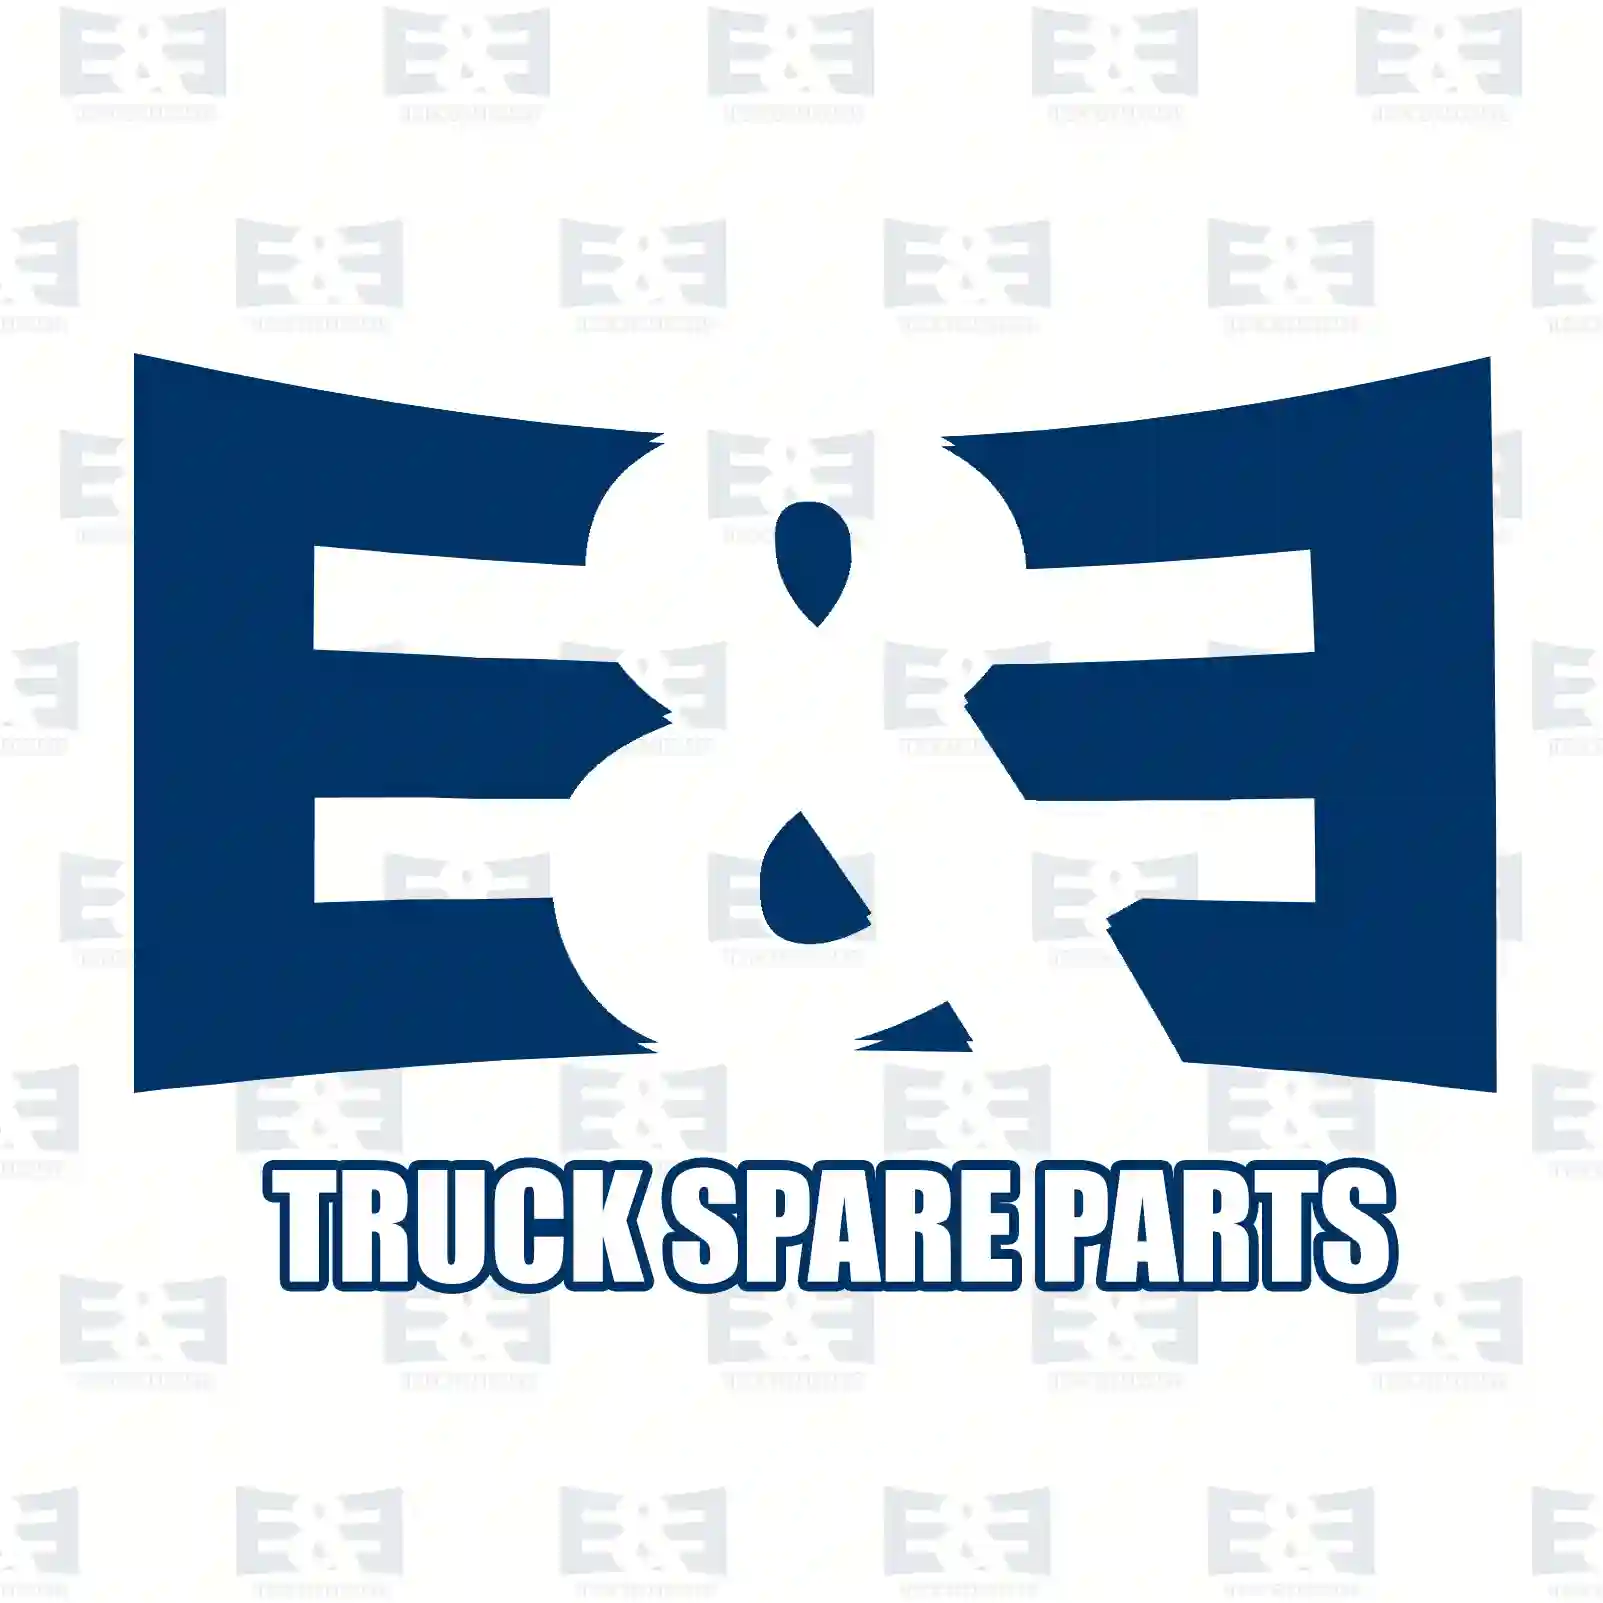 Cover moulding, lateral, left, without mounting material, 2E2289743, 735422721, 735465 ||  2E2289743 E&E Truck Spare Parts | Truck Spare Parts, Auotomotive Spare Parts Cover moulding, lateral, left, without mounting material, 2E2289743, 735422721, 735465 ||  2E2289743 E&E Truck Spare Parts | Truck Spare Parts, Auotomotive Spare Parts